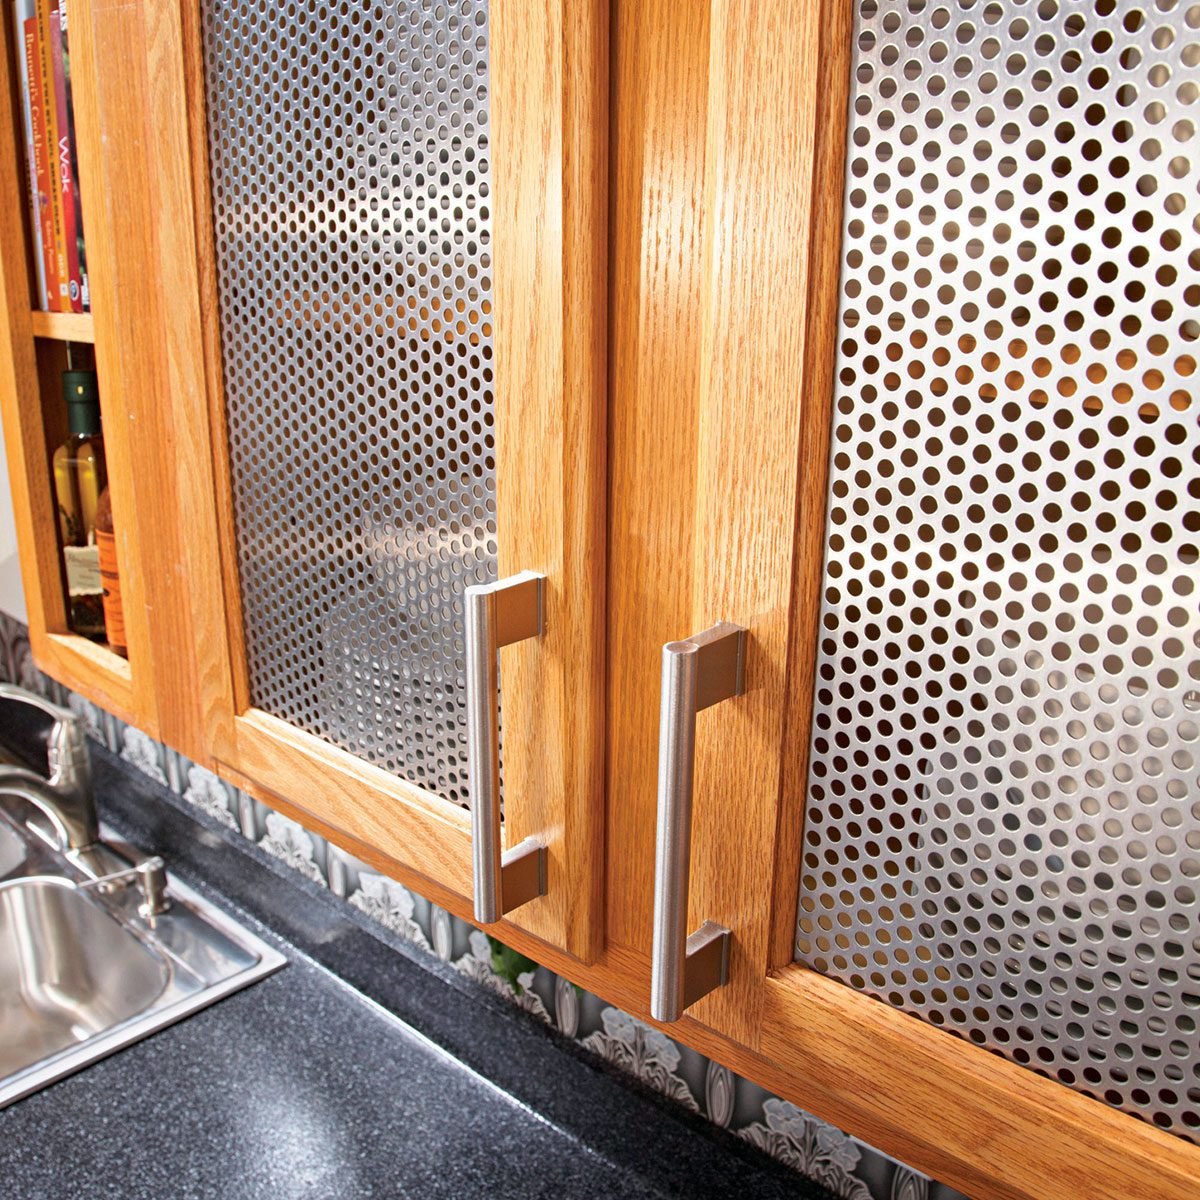 How To Upgrade Kitchen Cabinets with Door Inserts